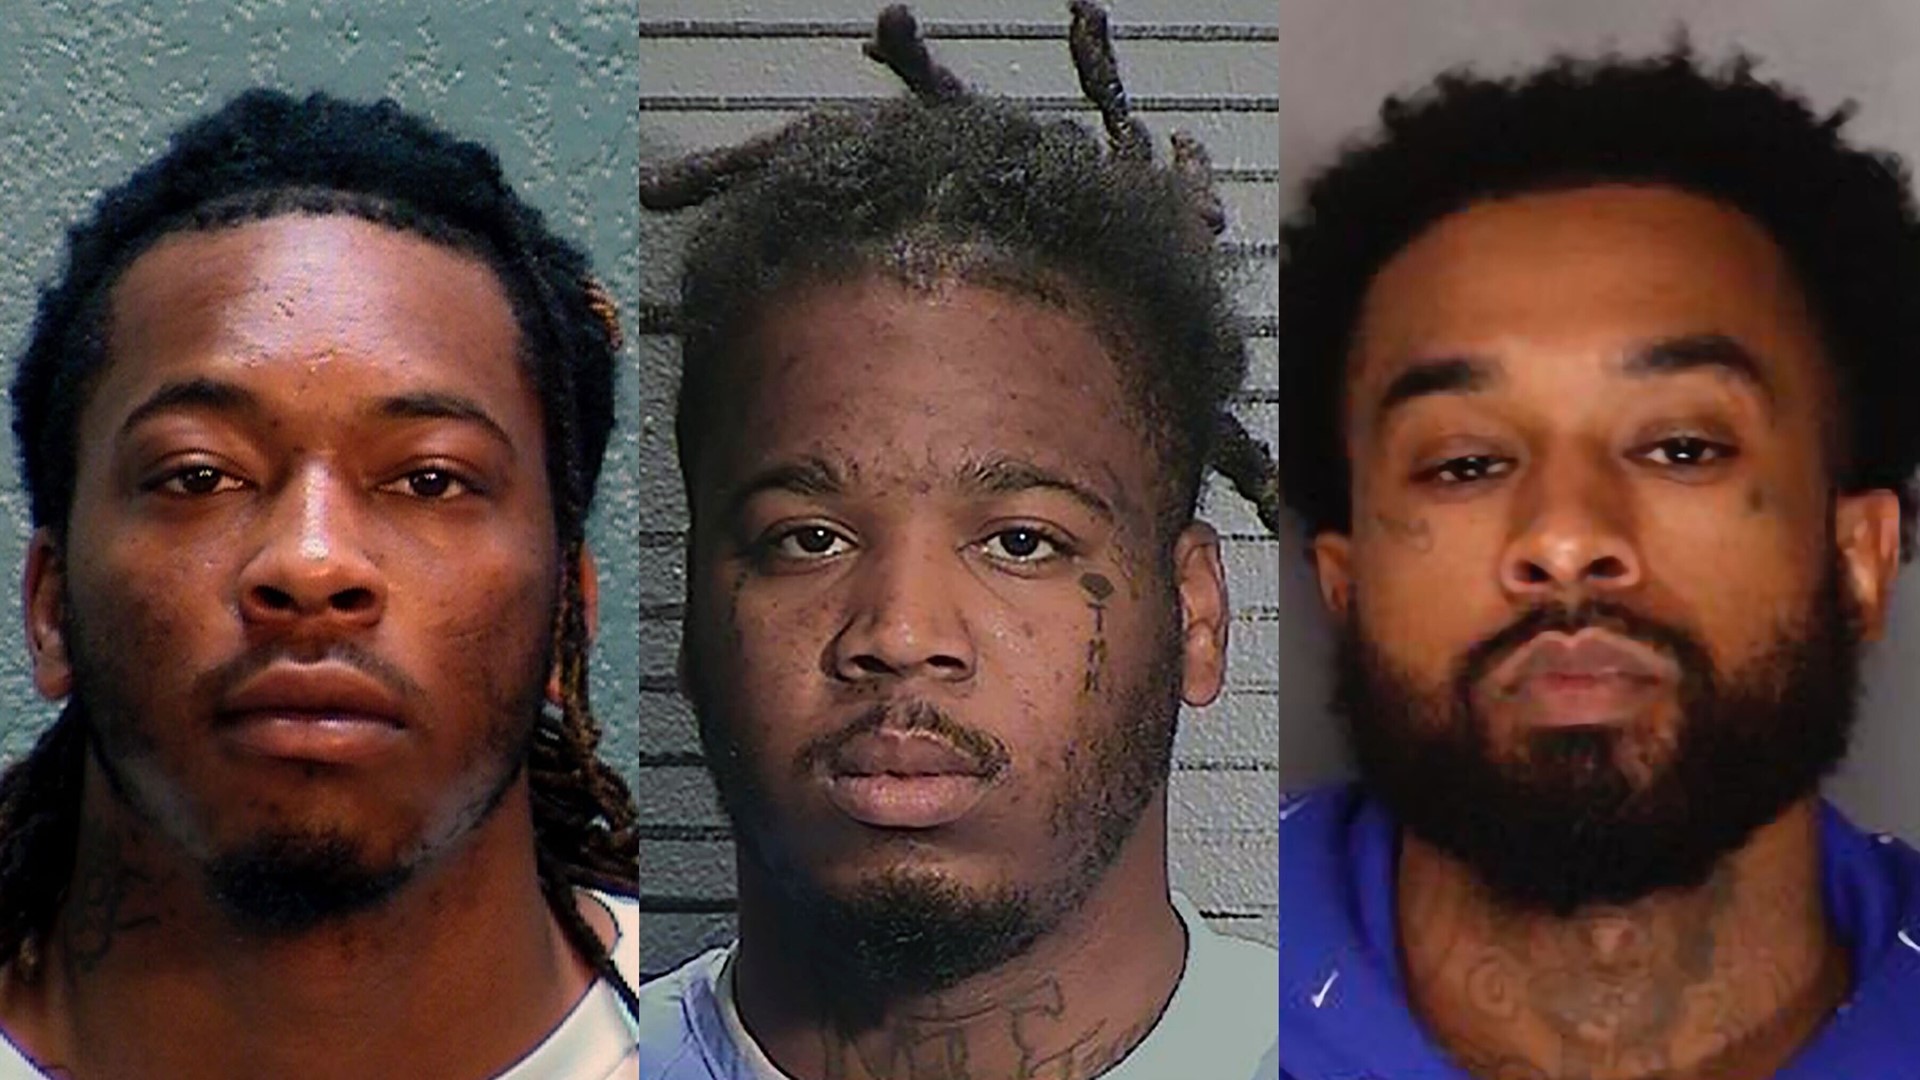 The third suspect in connection to the K Street shootout in Sacramento was identified as 27-year-old Mtula Payton.